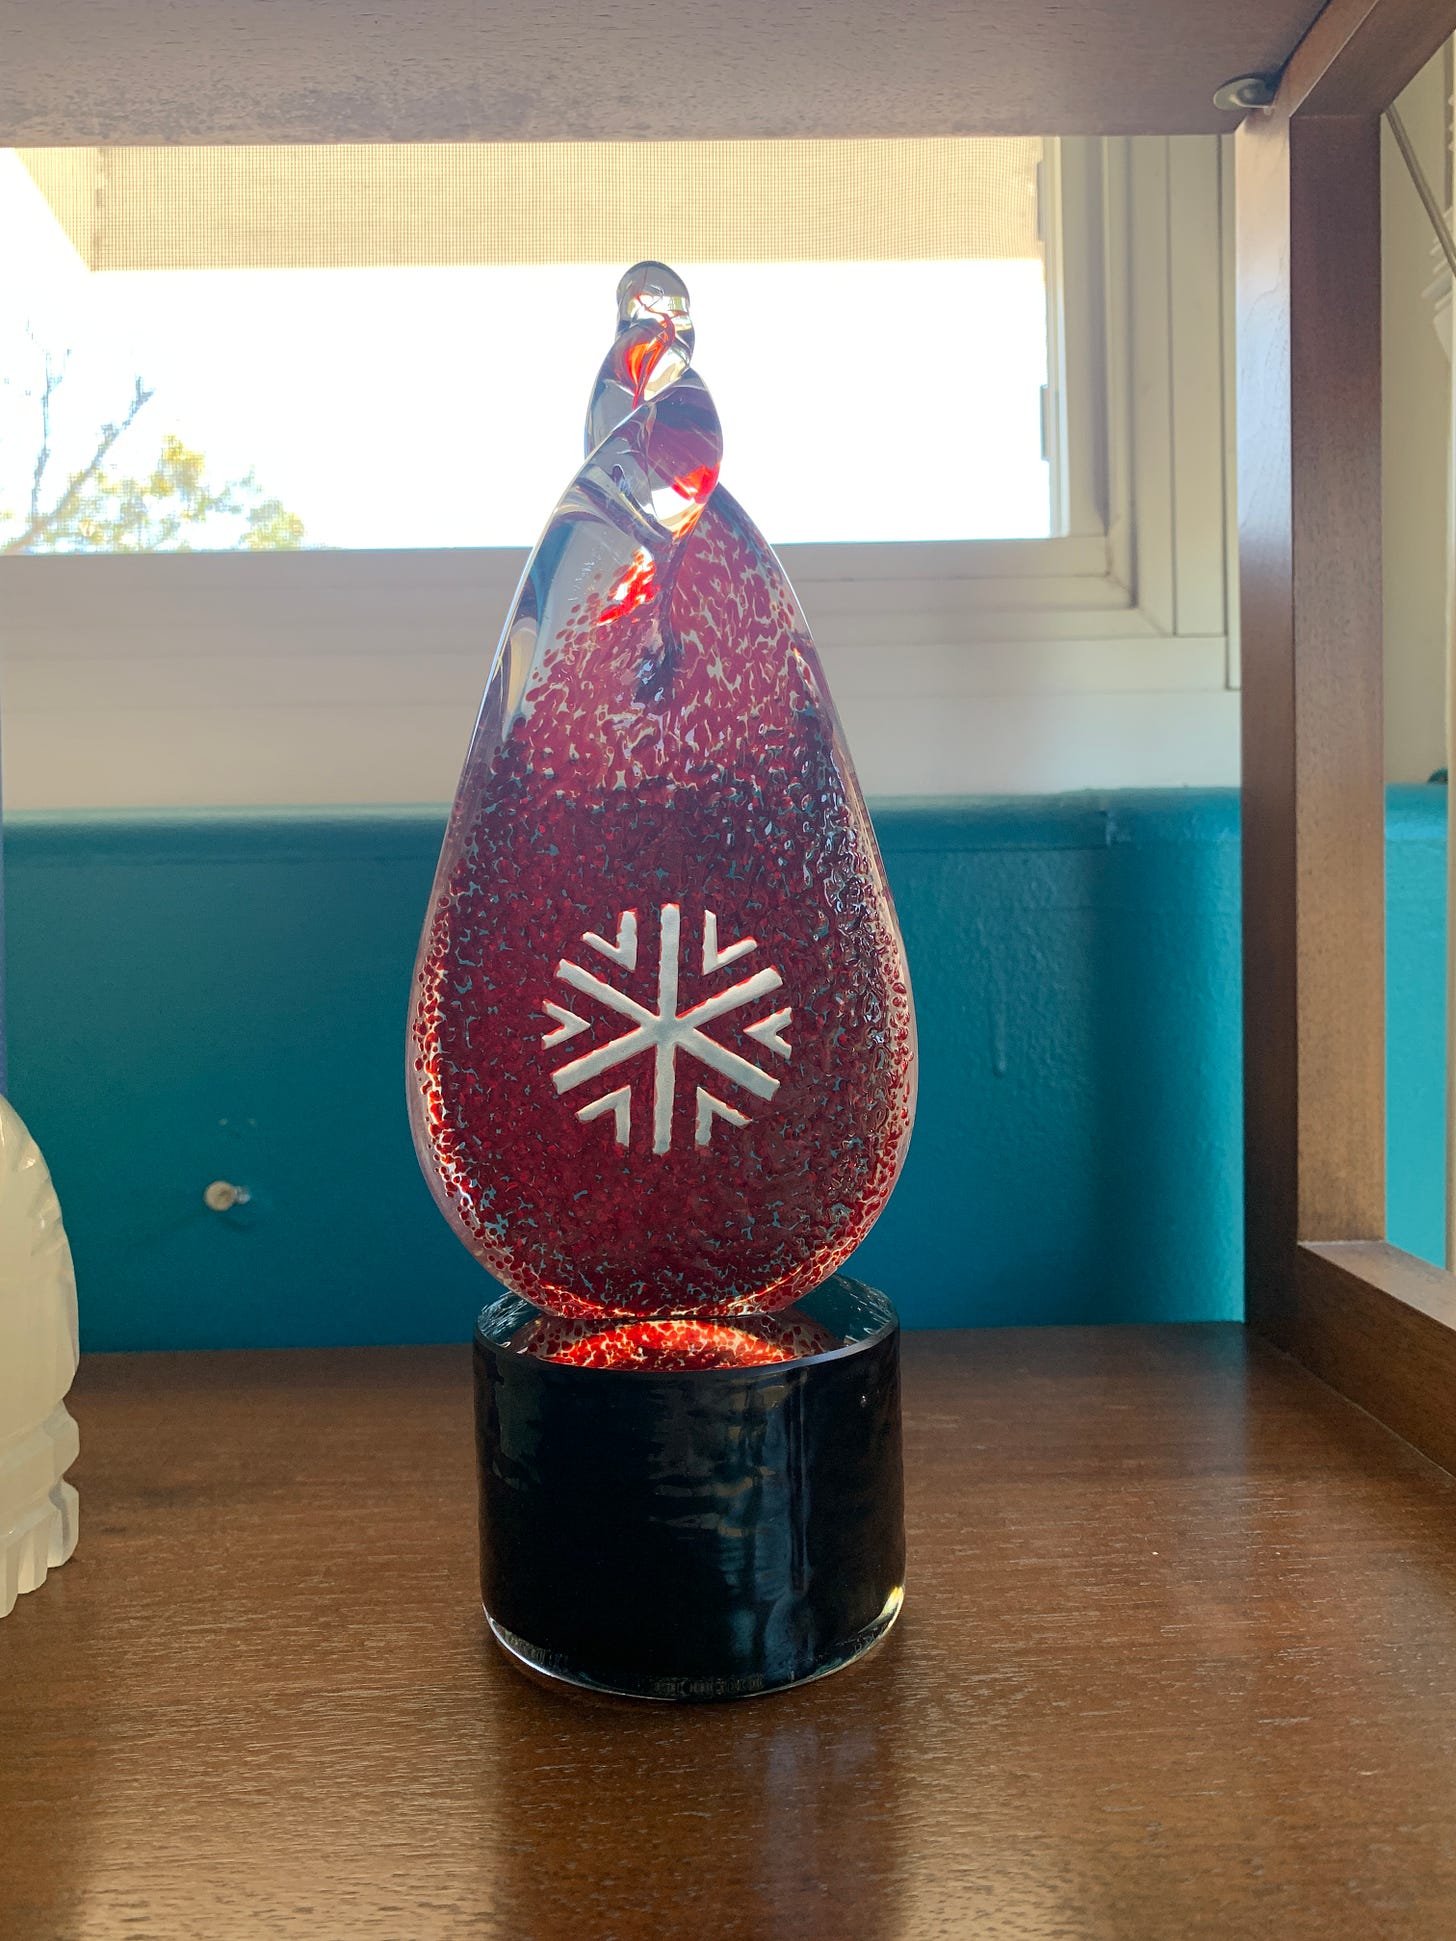 Caissie's Catalyst Festival Career Achievement Award, which she accepted after having an edible. It is red and clear glass, resembling a flame with a snowflake etched into it.